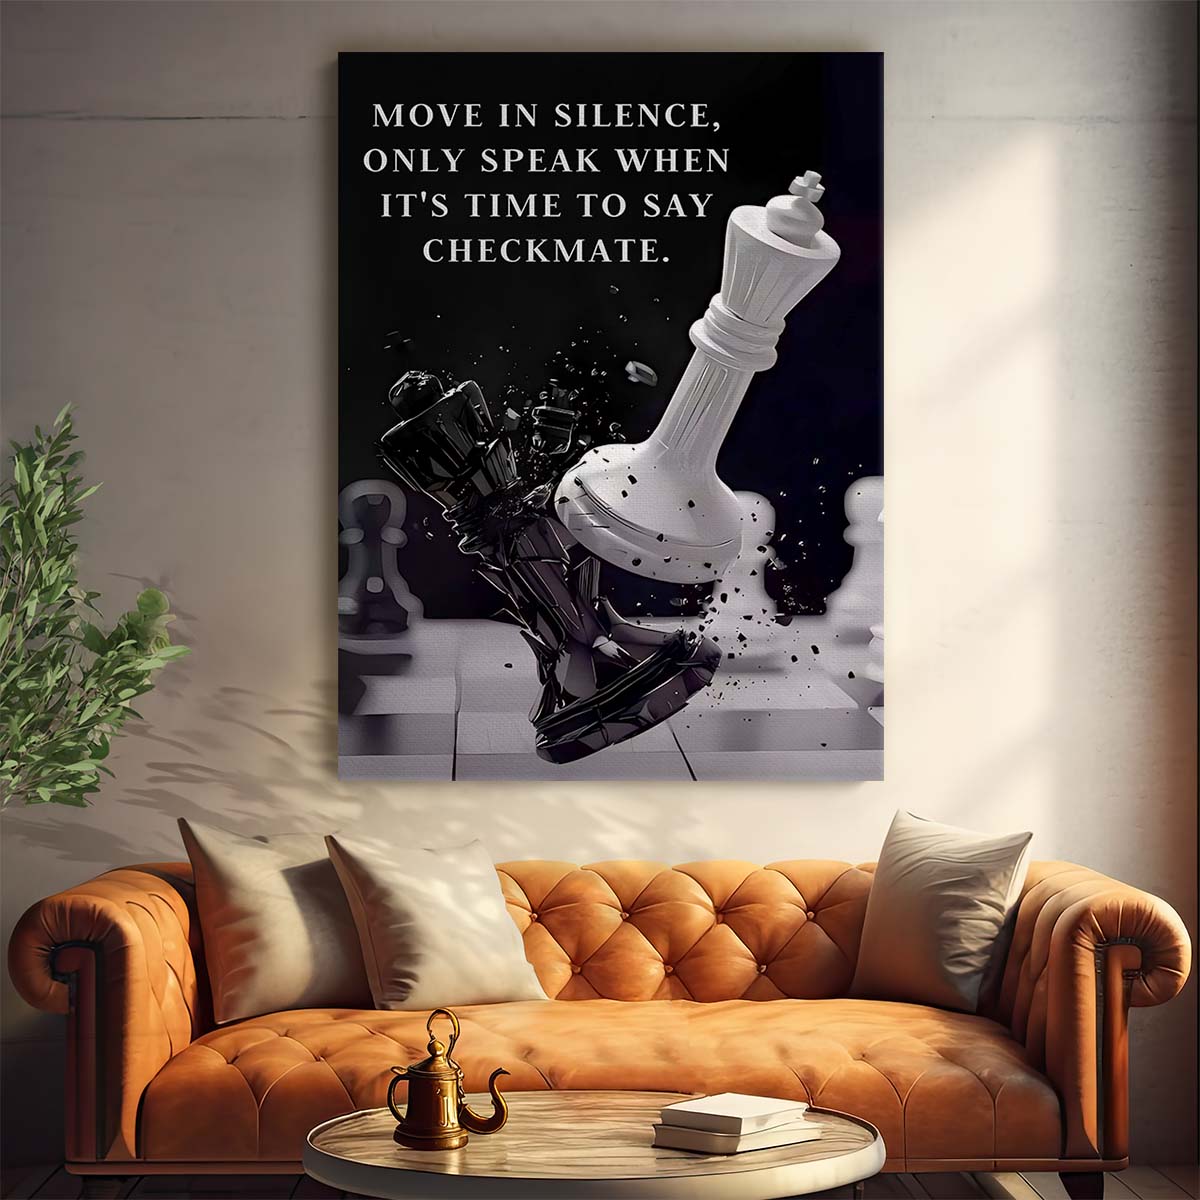 Move In Silence Wall Art by Luxuriance Designs. Made in USA.